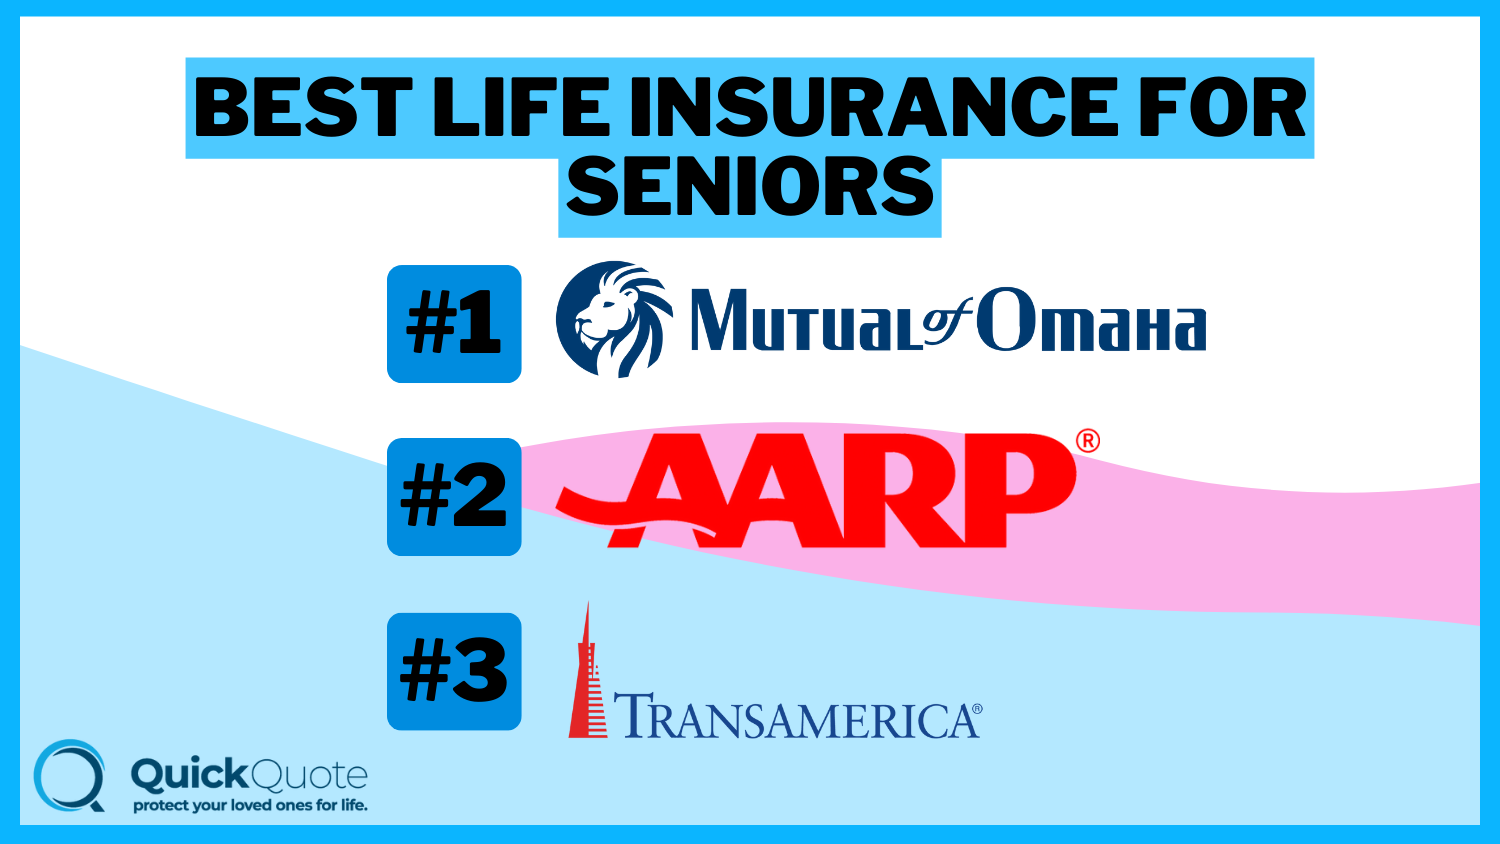 Best Life Insurance for Seniors: Mutual of Omaha, AARP, and Transamerica